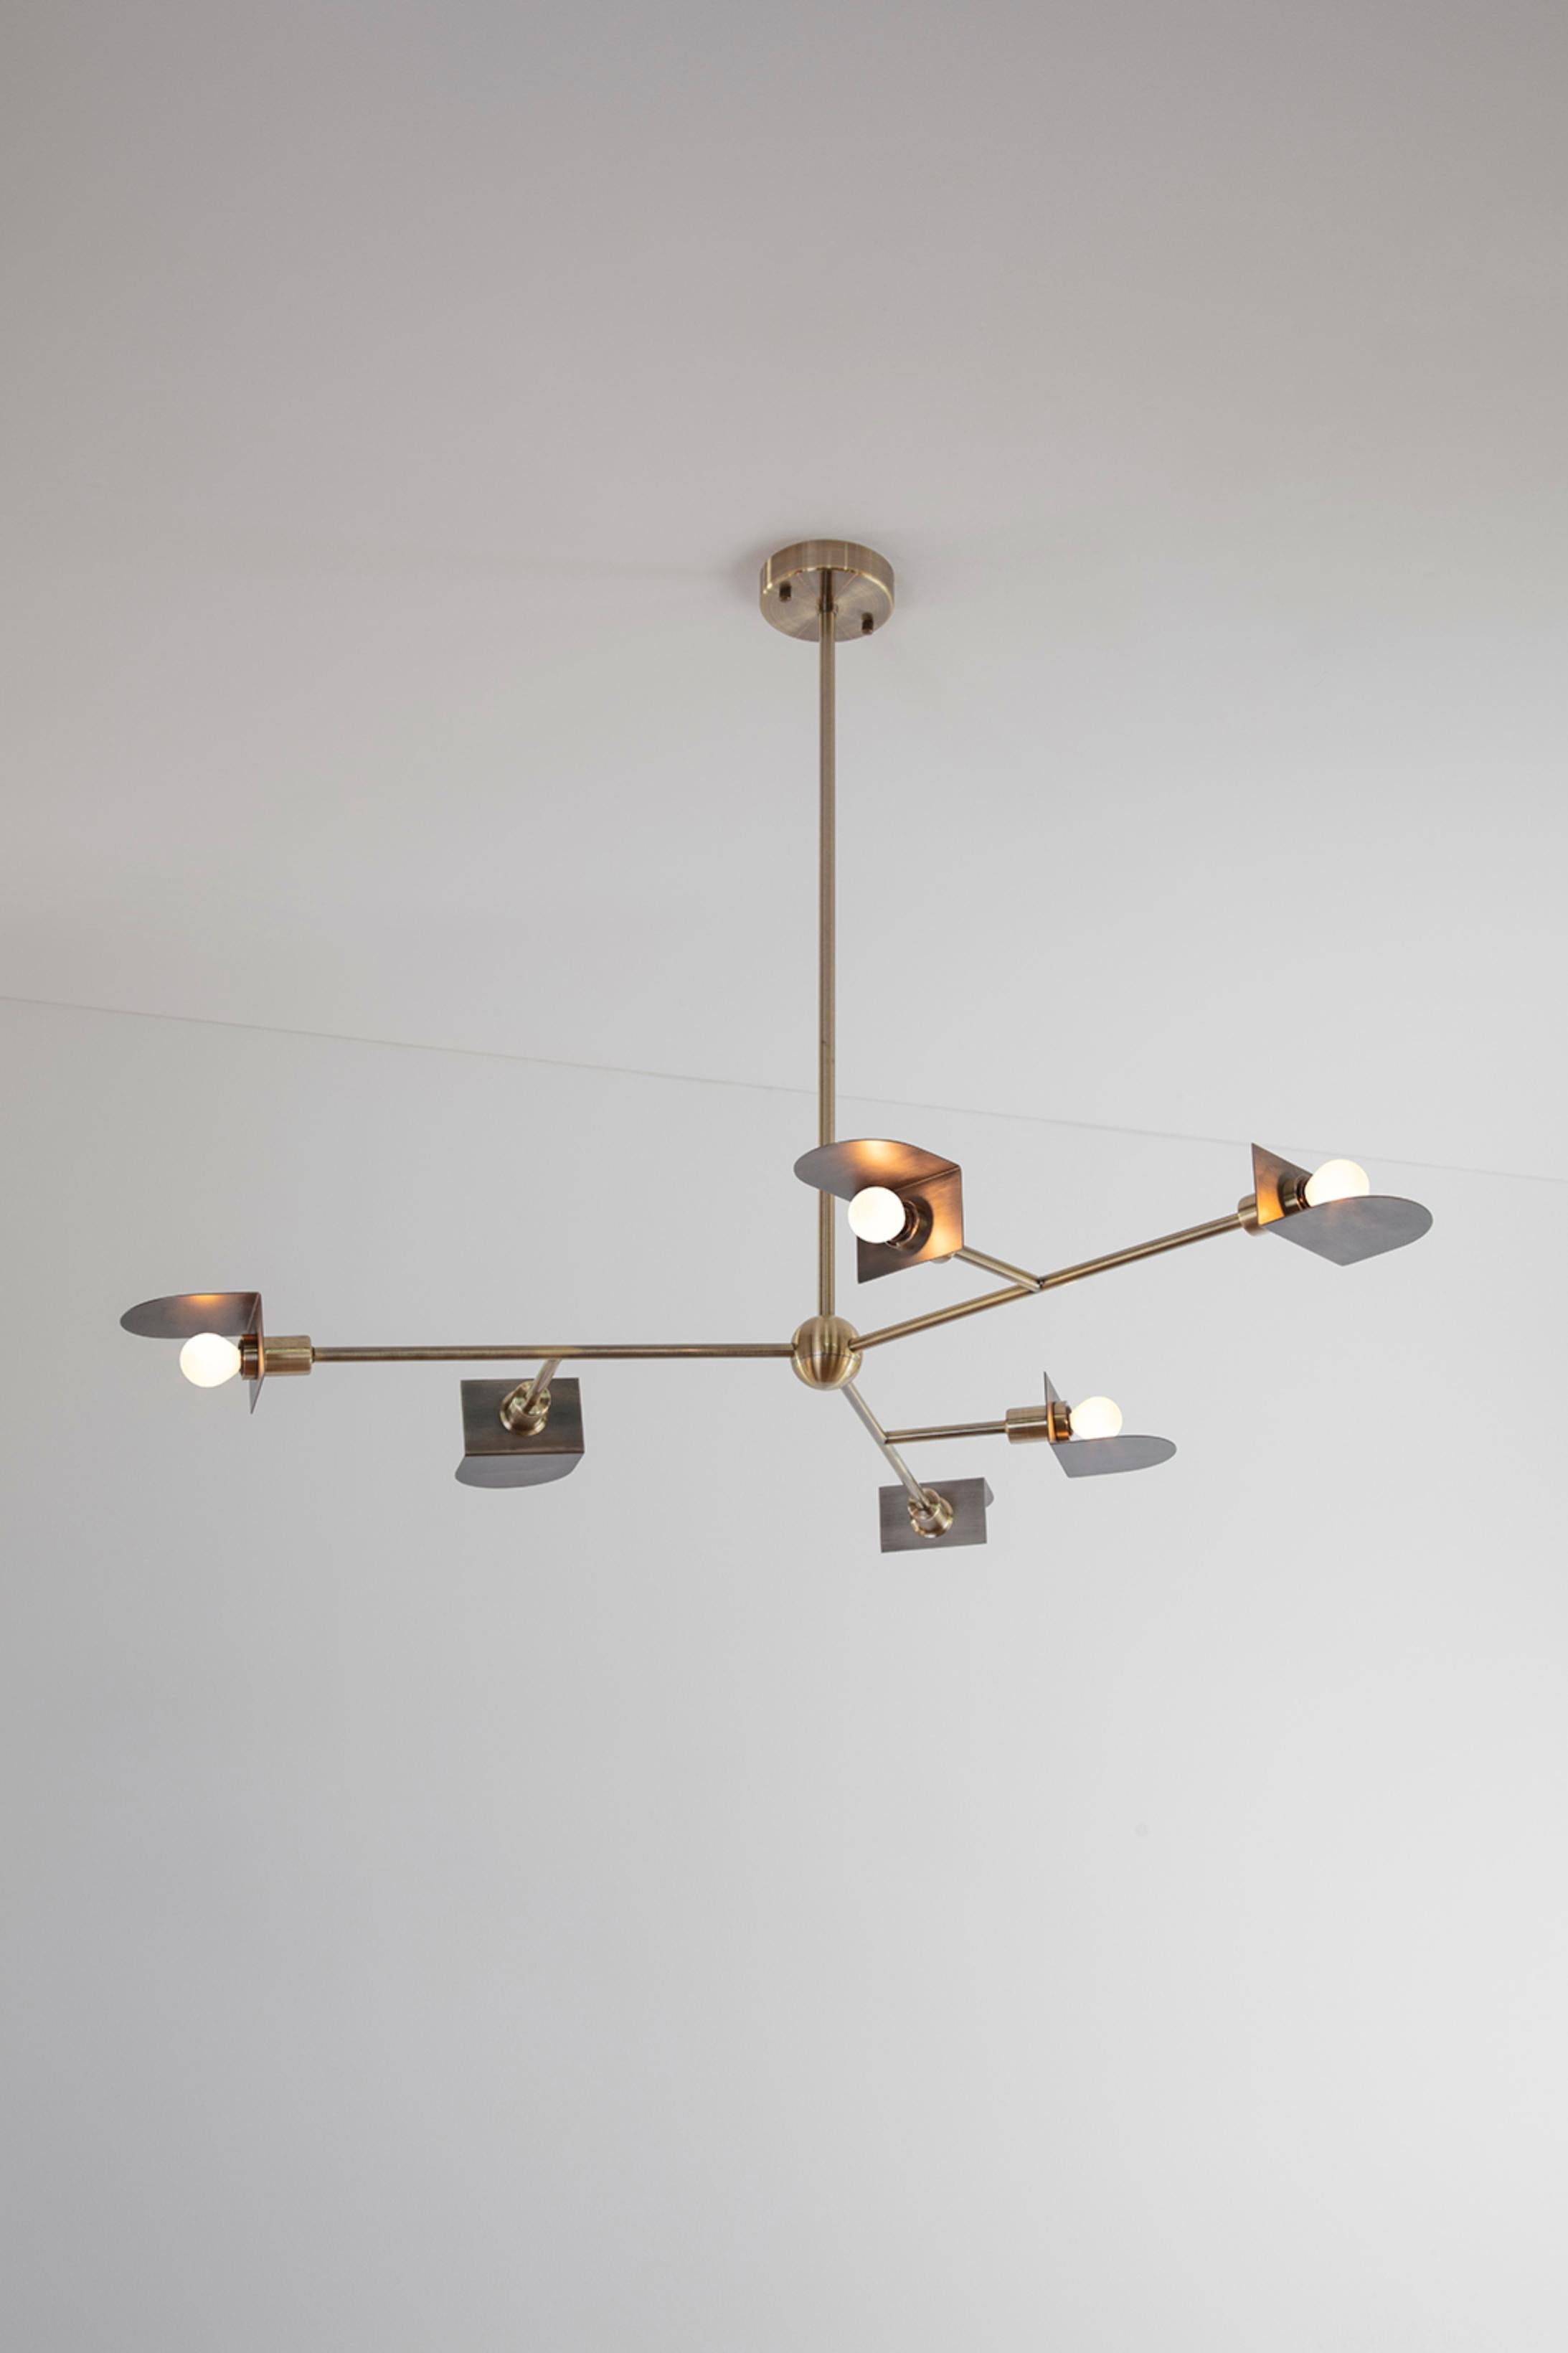 Brass Route II Chandelier by Square in Circle
Dimensions: W 110 x H 55 x D 110 cm.
Materials: Brushed brass finish and dark grey metal.

An ambitious chandelier with geometric semicircular metal shades with returns crafted from metal. This three -